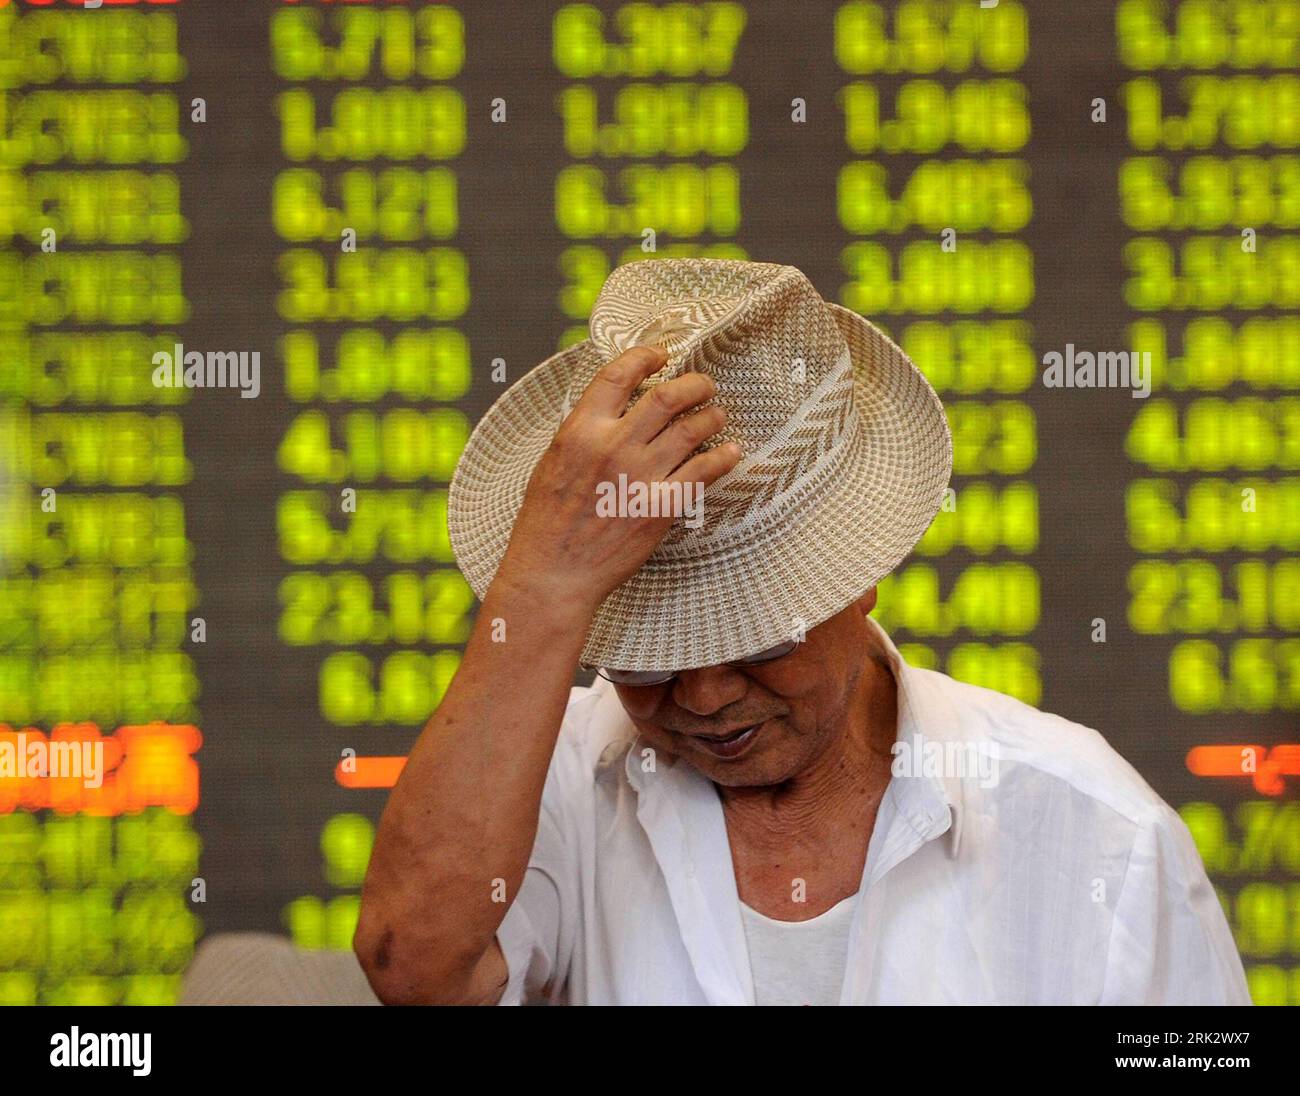 Bildnummer: 53258119  Datum: 12.08.2009  Copyright: imago/Xinhua (090812) -- SHENYANG, Aug. 12, 2009 (Xinhua) -- A man is seen at a stock exchange market in Shenyang, capital of northeast China s Liaoning Province, Aug. 12, 2009. Chinese equities slumped 4.66 percent Wednesday with the benchmark Shanghai Composite Index down 152.01 points, to finish at 3,112.72. The Shenzhen Component Index dropped 4.15 percent, or 545.44 points, to end at 12,591.66. (Xinhua/Li Gang) (zcq) (2)CHINA-SHENYANG-STOCKS-INDEX  PUBLICATIONxNOTxINxCHN  Wirtschaft Börse Shanghai kbdig xcb  2009 quer     Bildnummer 5325 Stock Photo